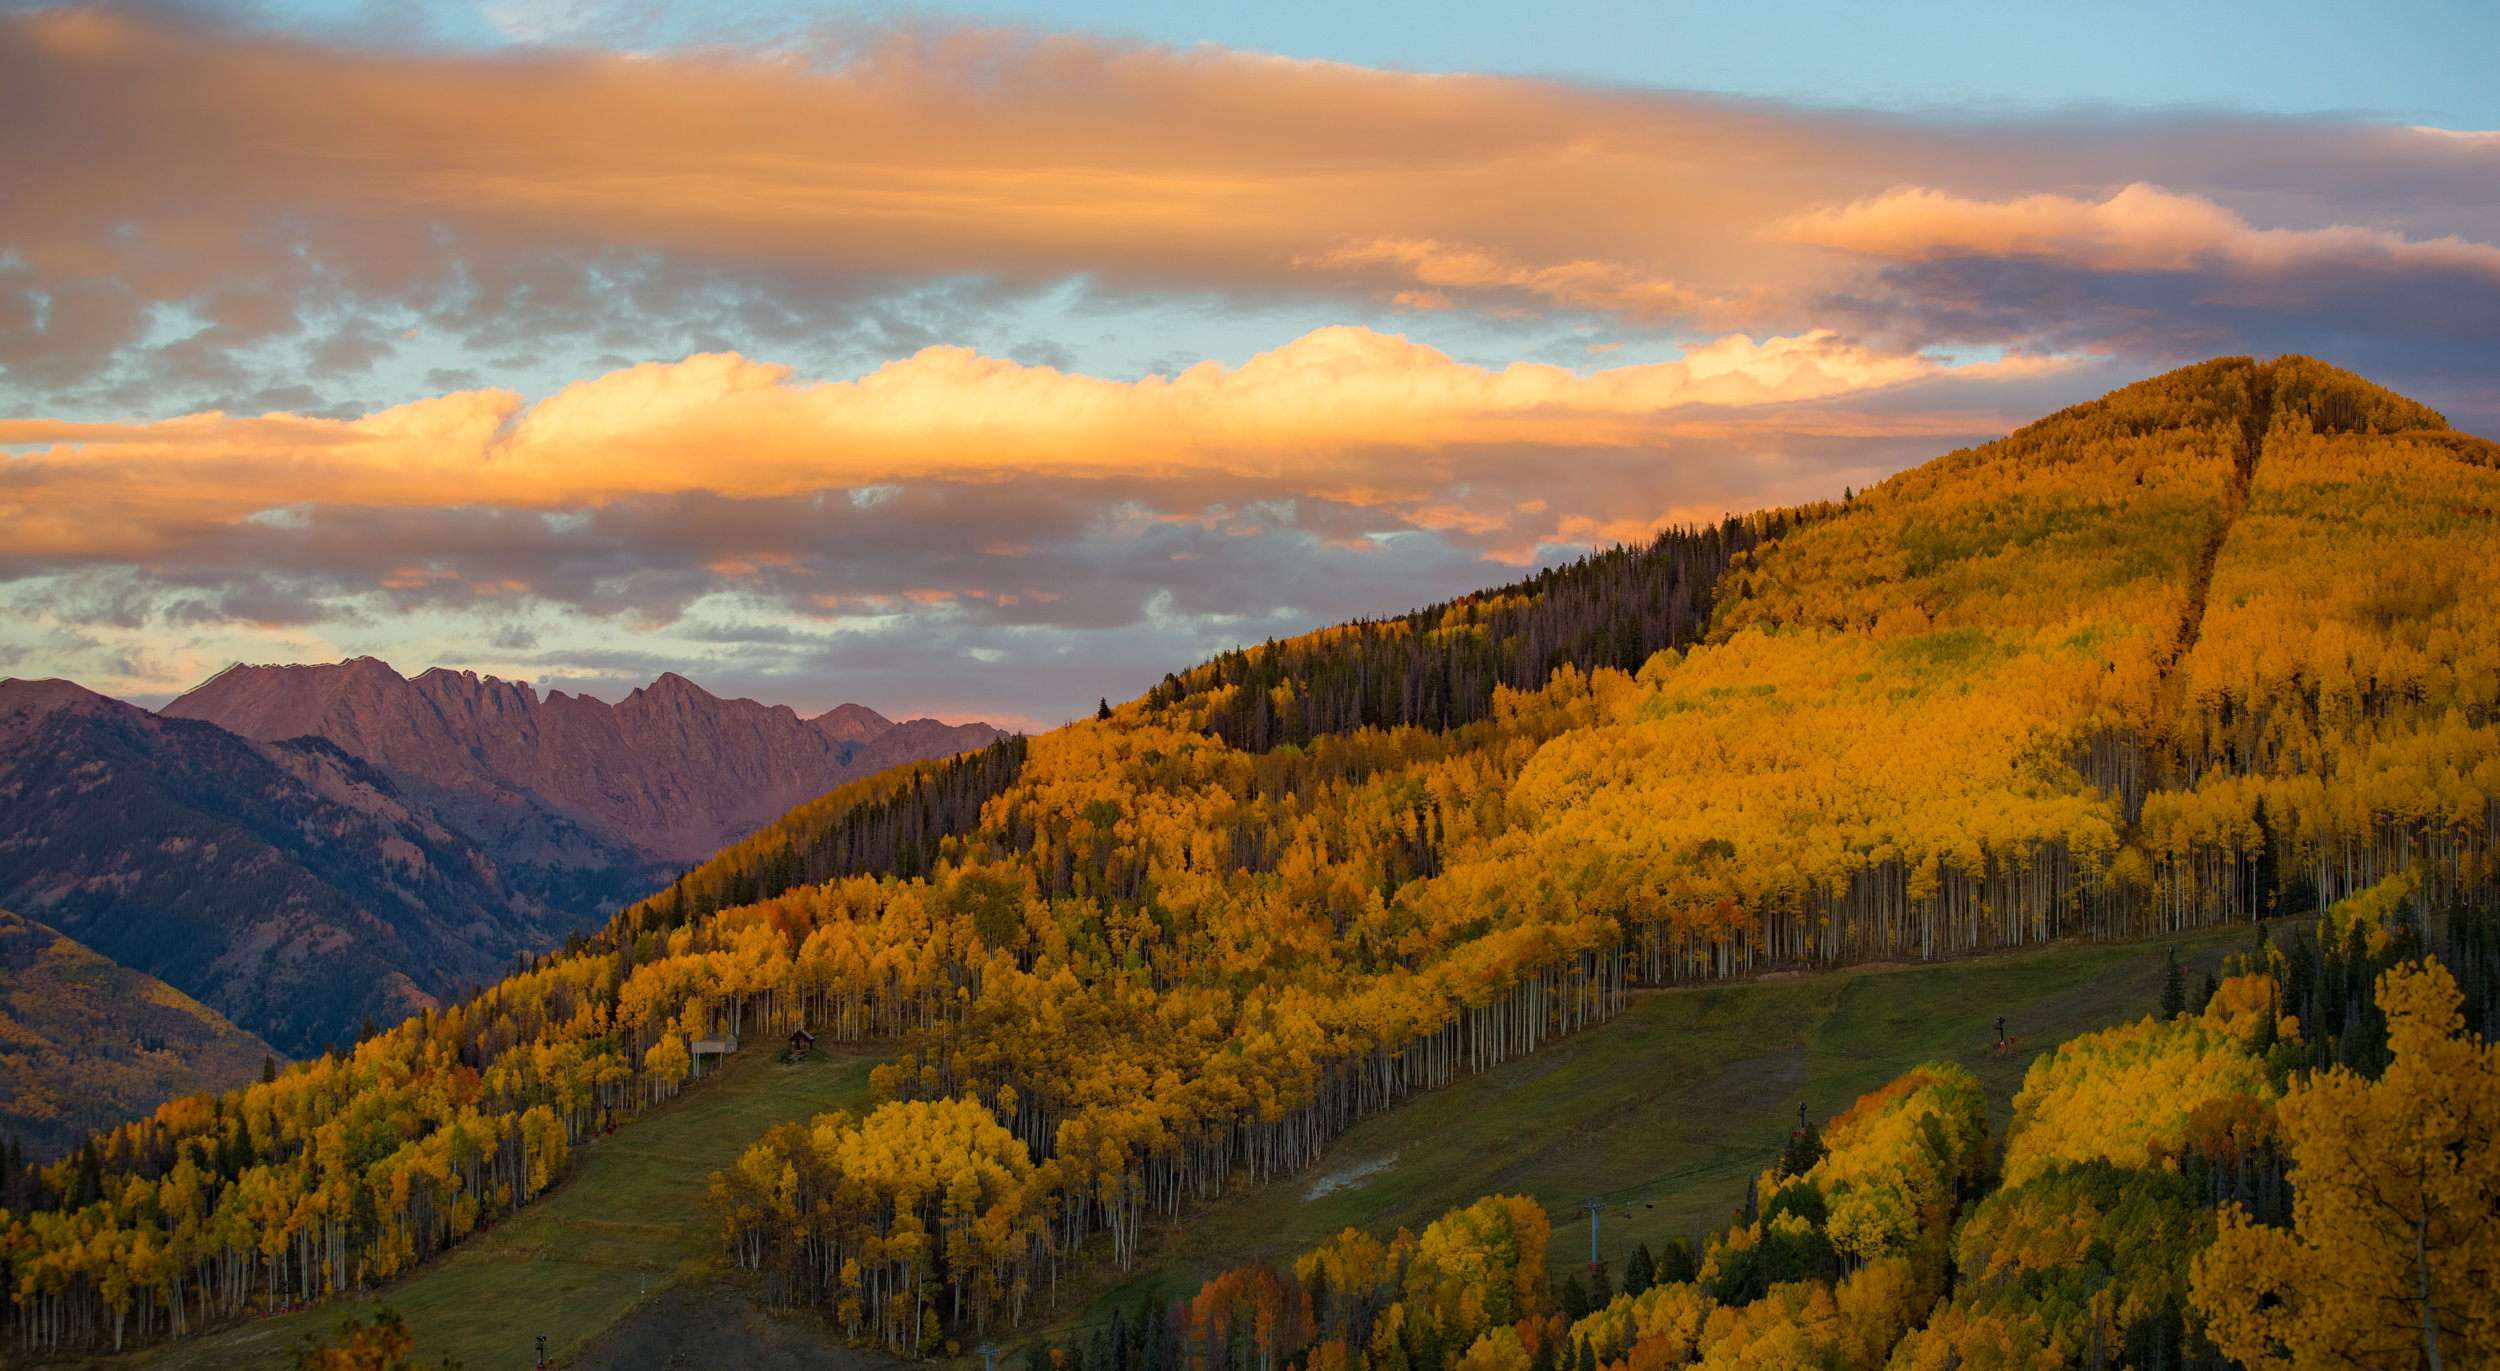  An amazing golden sunset on Vail Mountain while waiting for the lunar eclipse. 